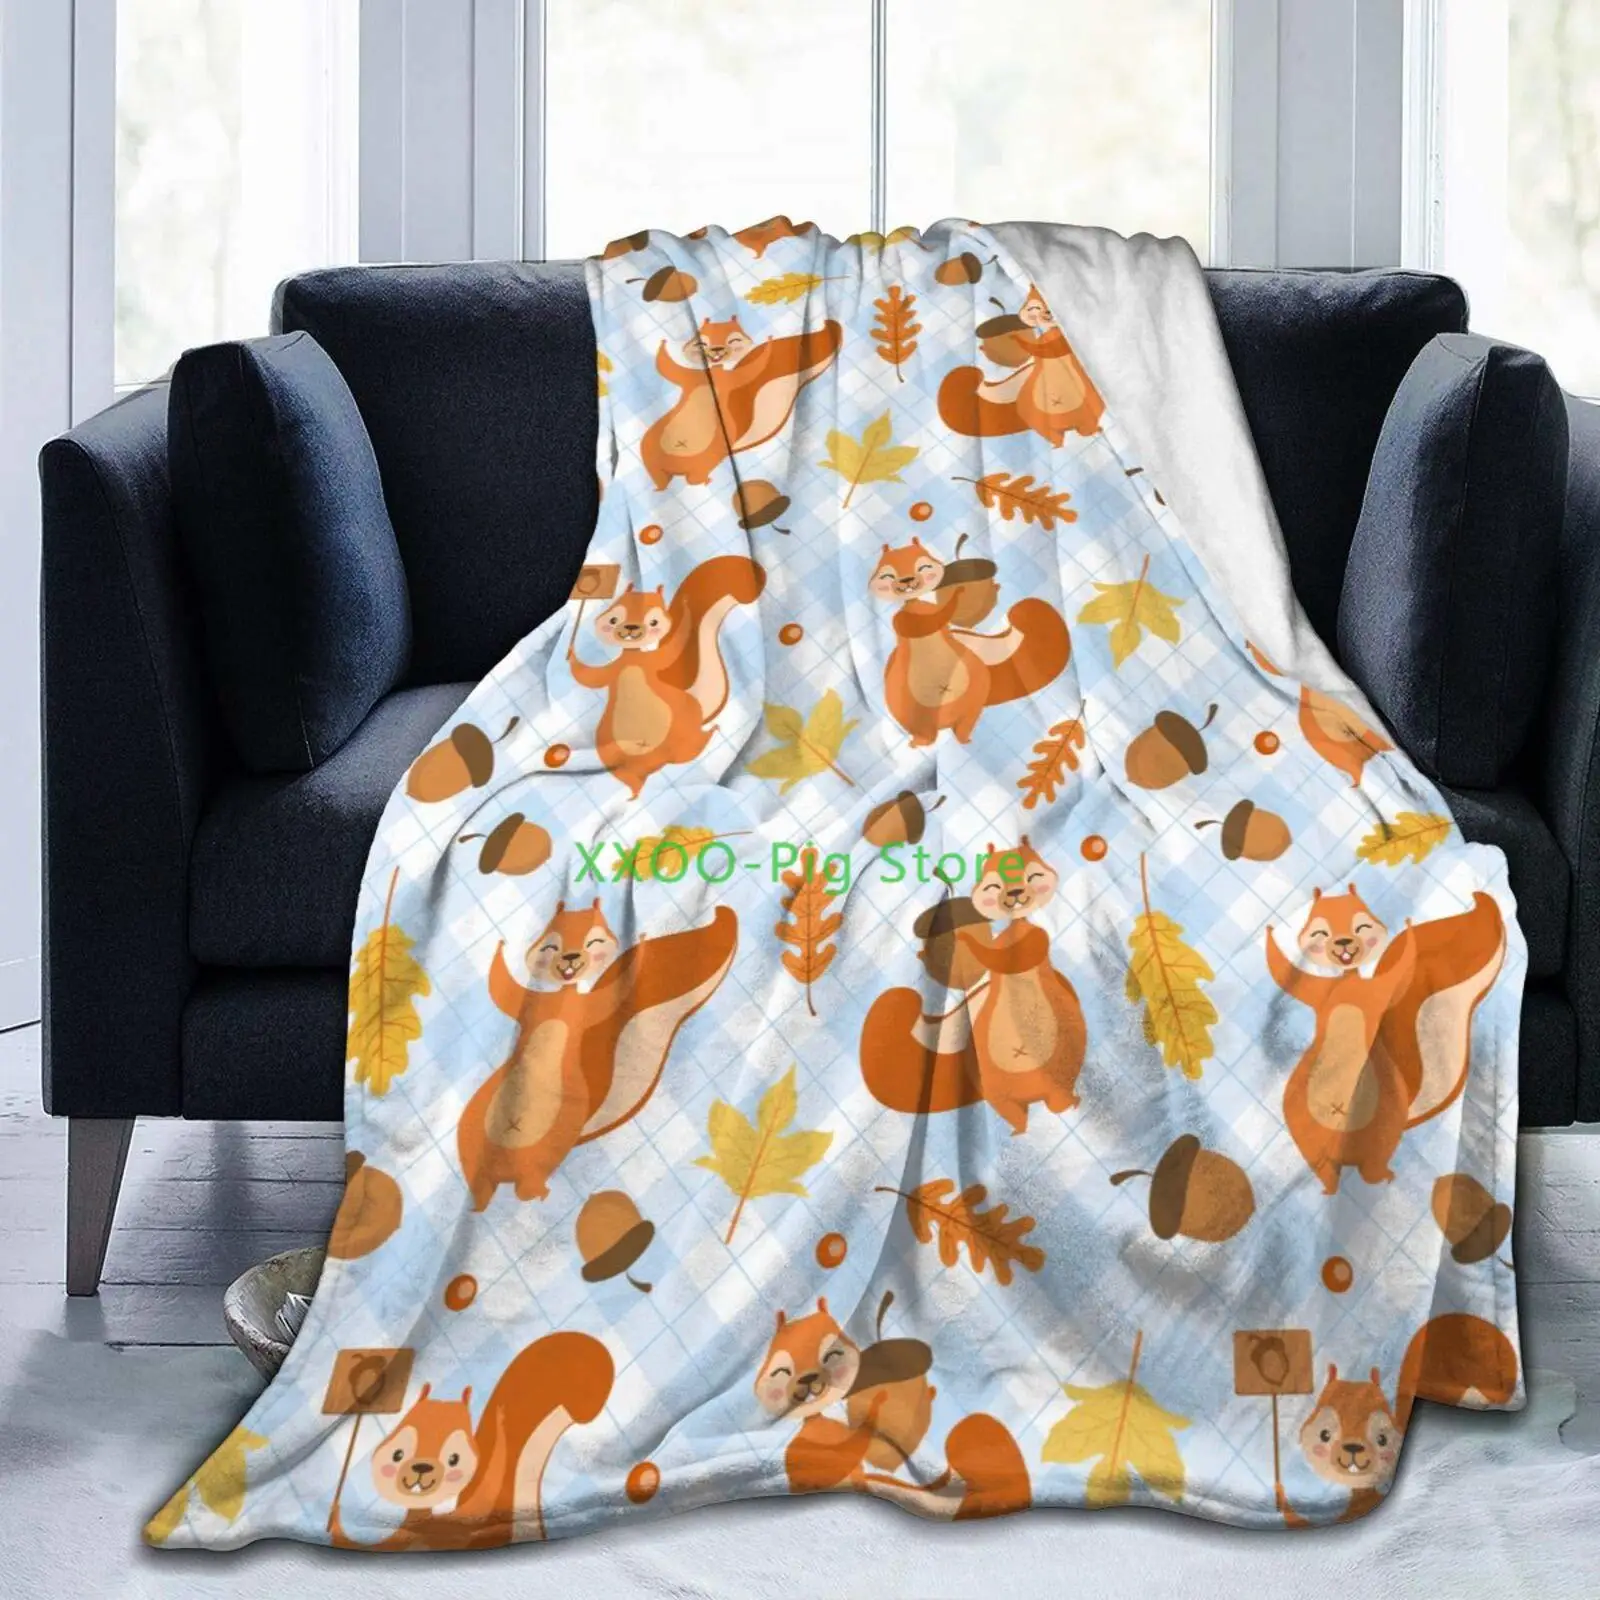 

A Fall Squirrel Blanket Flannel Throw Blanket Ultra Soft Micro Fleece Blanket Bed Couch Living Room 150x220cm for Adults